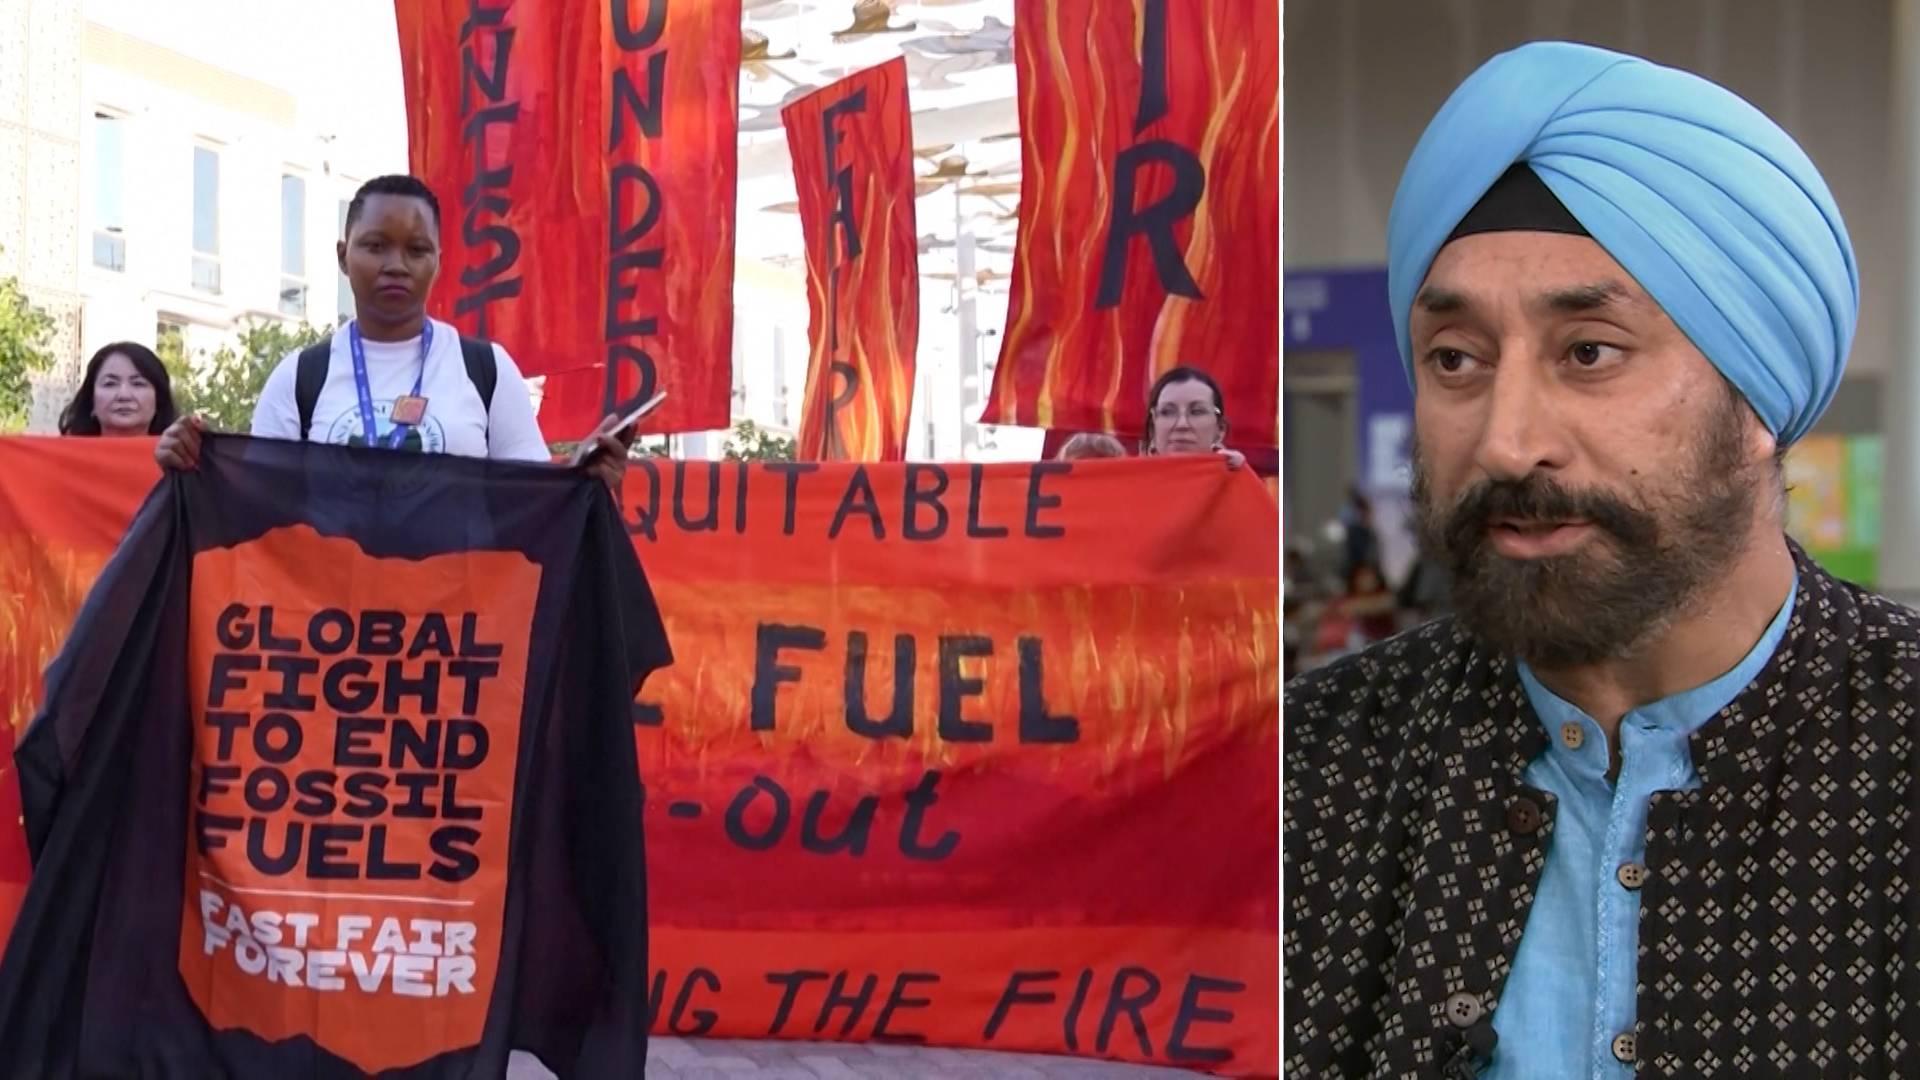 Anti-fossil fuel activists denounce the power of oil companies at the UN climate change summit